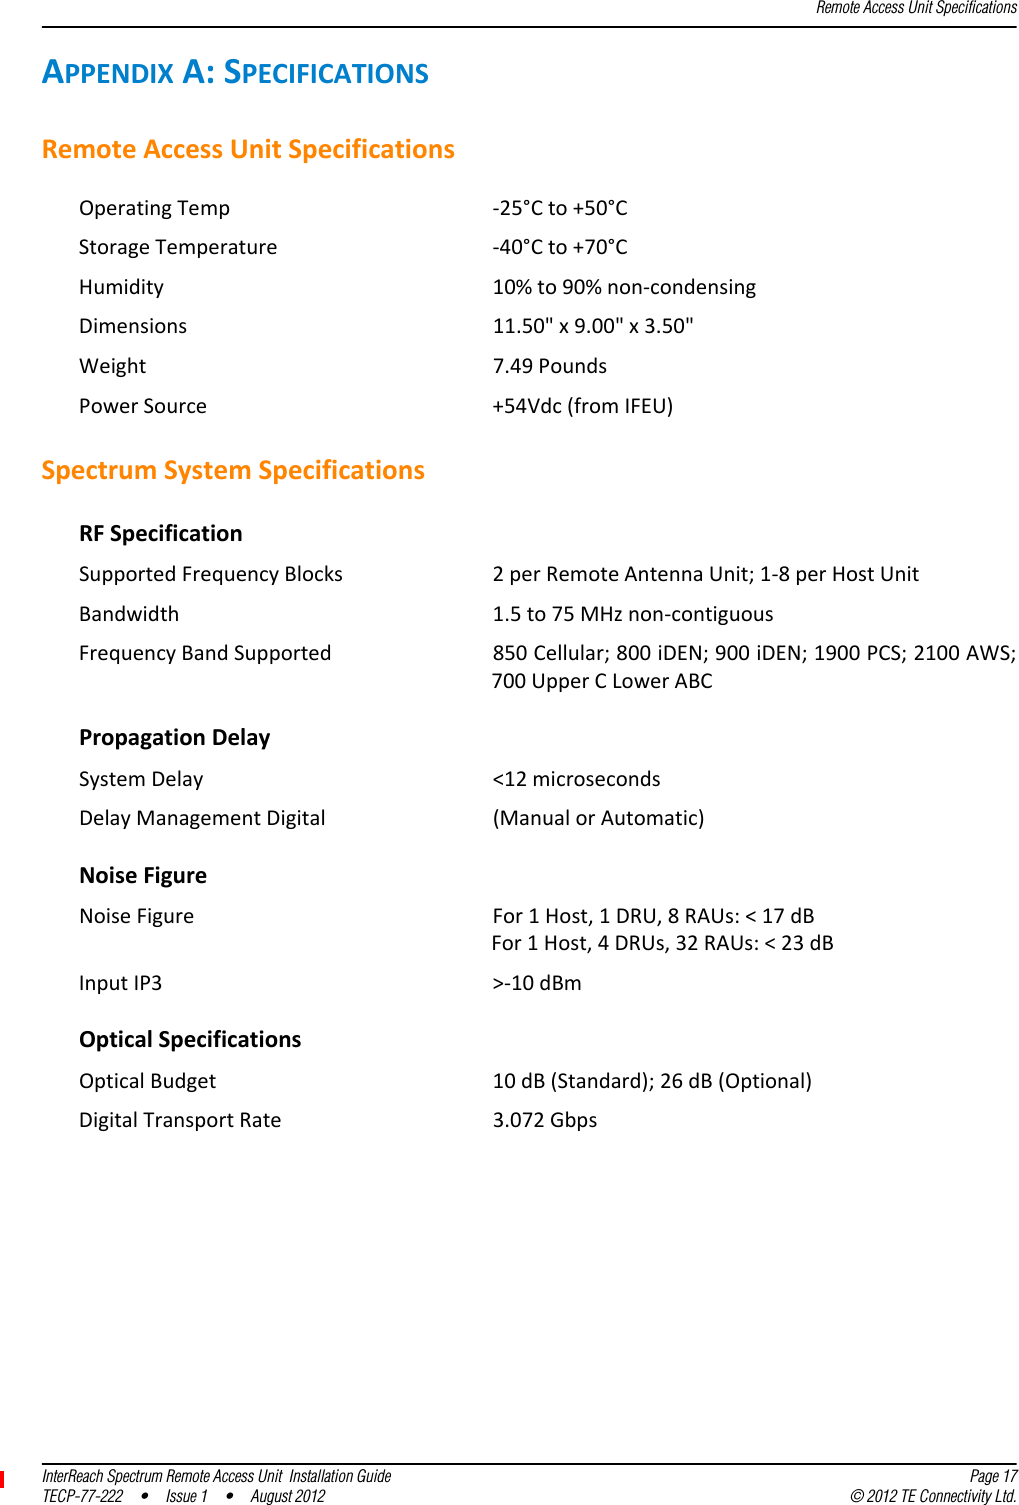 Remote Access Unit SpecificationsInterReach Spectrum Remote Access Unit  Installation Guide Page 17TECP-77-222 • Issue 1 • August 2012 © 2012 TE Connectivity Ltd.APPENDIXA:SPECIFICATIONSRemoteAccessUnitSpecificationsOperatingTemp ‐25°Cto+50°CStorageTemperature ‐40°Cto+70°CHumidity 10%to90%non‐condensingDimensions 11.50&quot;x9.00&quot;x3.50&quot;Weight 7.49PoundsPowerSource +54Vdc(fromIFEU)SpectrumSystemSpecificationsRFSpecificationSupportedFrequencyBlocks 2perRemoteAntennaUnit;1‐8perHostUnitBandwidth 1.5to75MHznon‐contiguousFrequencyBandSupported 850Cellular;800iDEN;900iDEN;1900PCS;2100AWS;700UpperCLowerABCPropagationDelaySystemDelay &lt;12microsecondsDelayManagementDigital (ManualorAutomatic)NoiseFigureNoiseFigure For1Host,1DRU,8RAUs:&lt;17dBFor1Host,4DRUs,32RAUs:&lt;23dBInputIP3 &gt;‐10dBmOpticalSpecificationsOpticalBudget 10dB(Standard);26dB(Optional)DigitalTransportRate 3.072Gbps